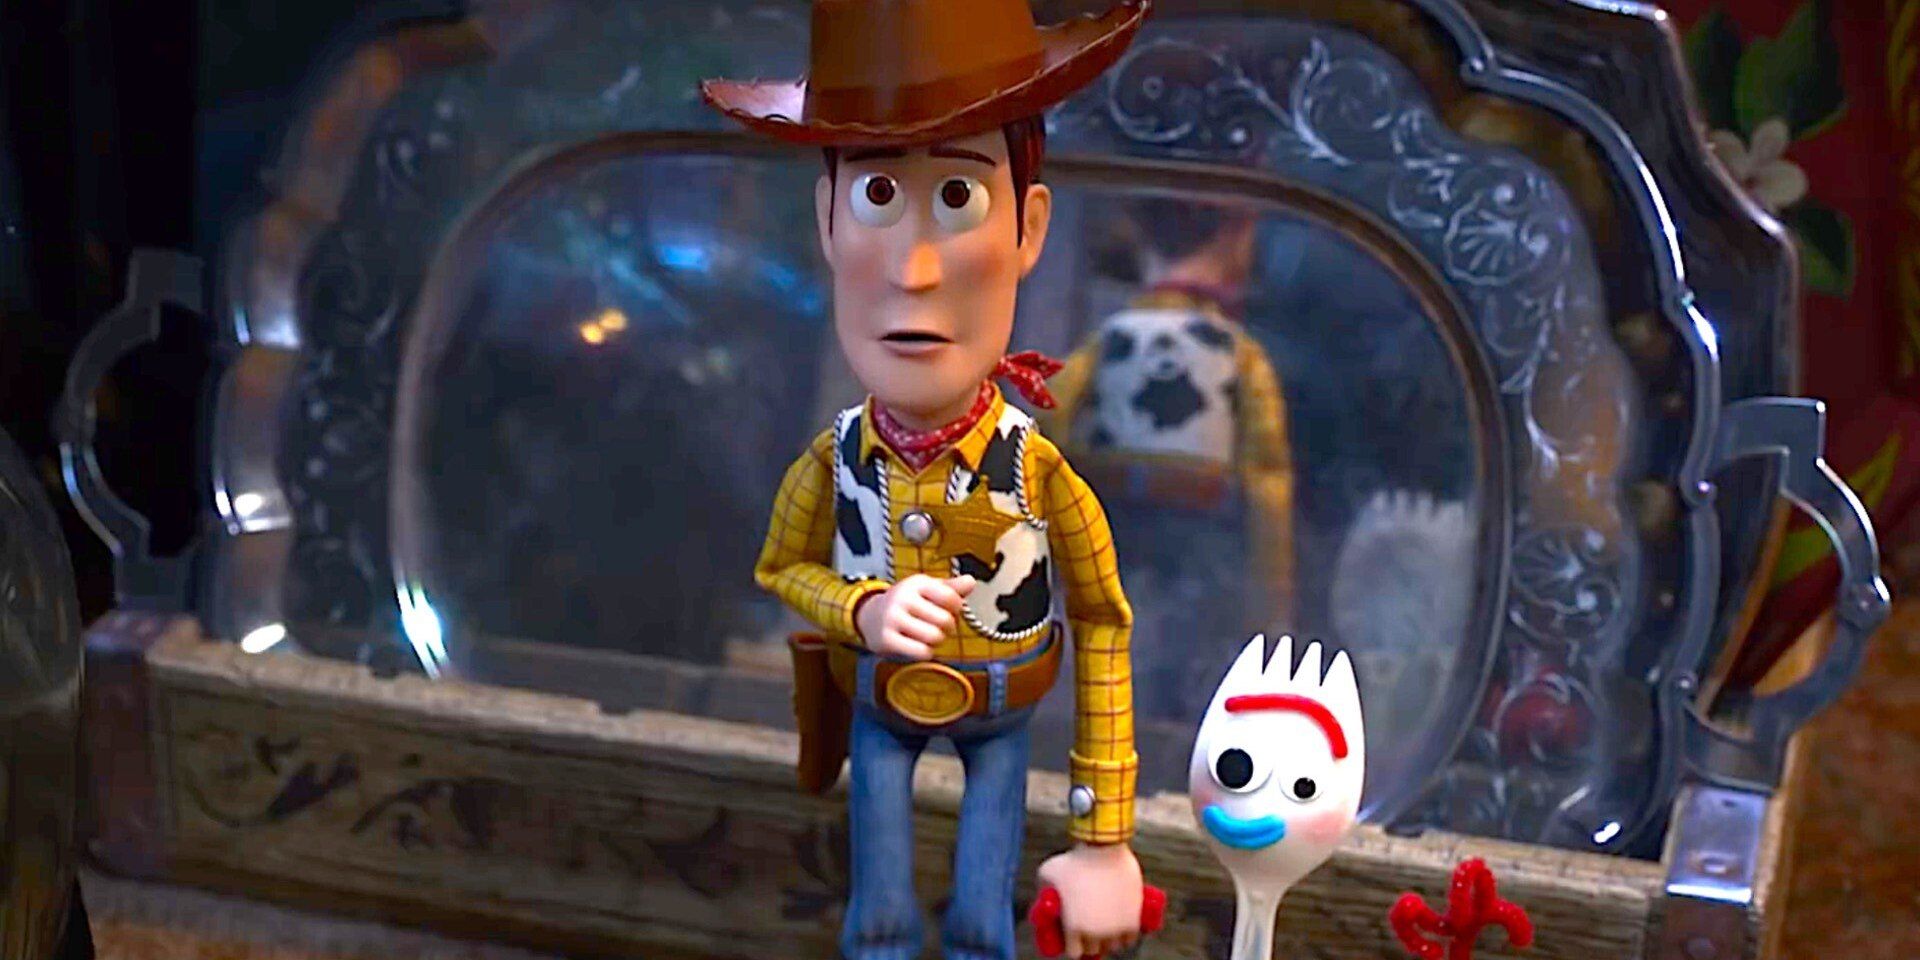 Toy Story 5 set to bring back Woody and Buzz Lightyear, Disney's Pixar boss  says, Ents & Arts News